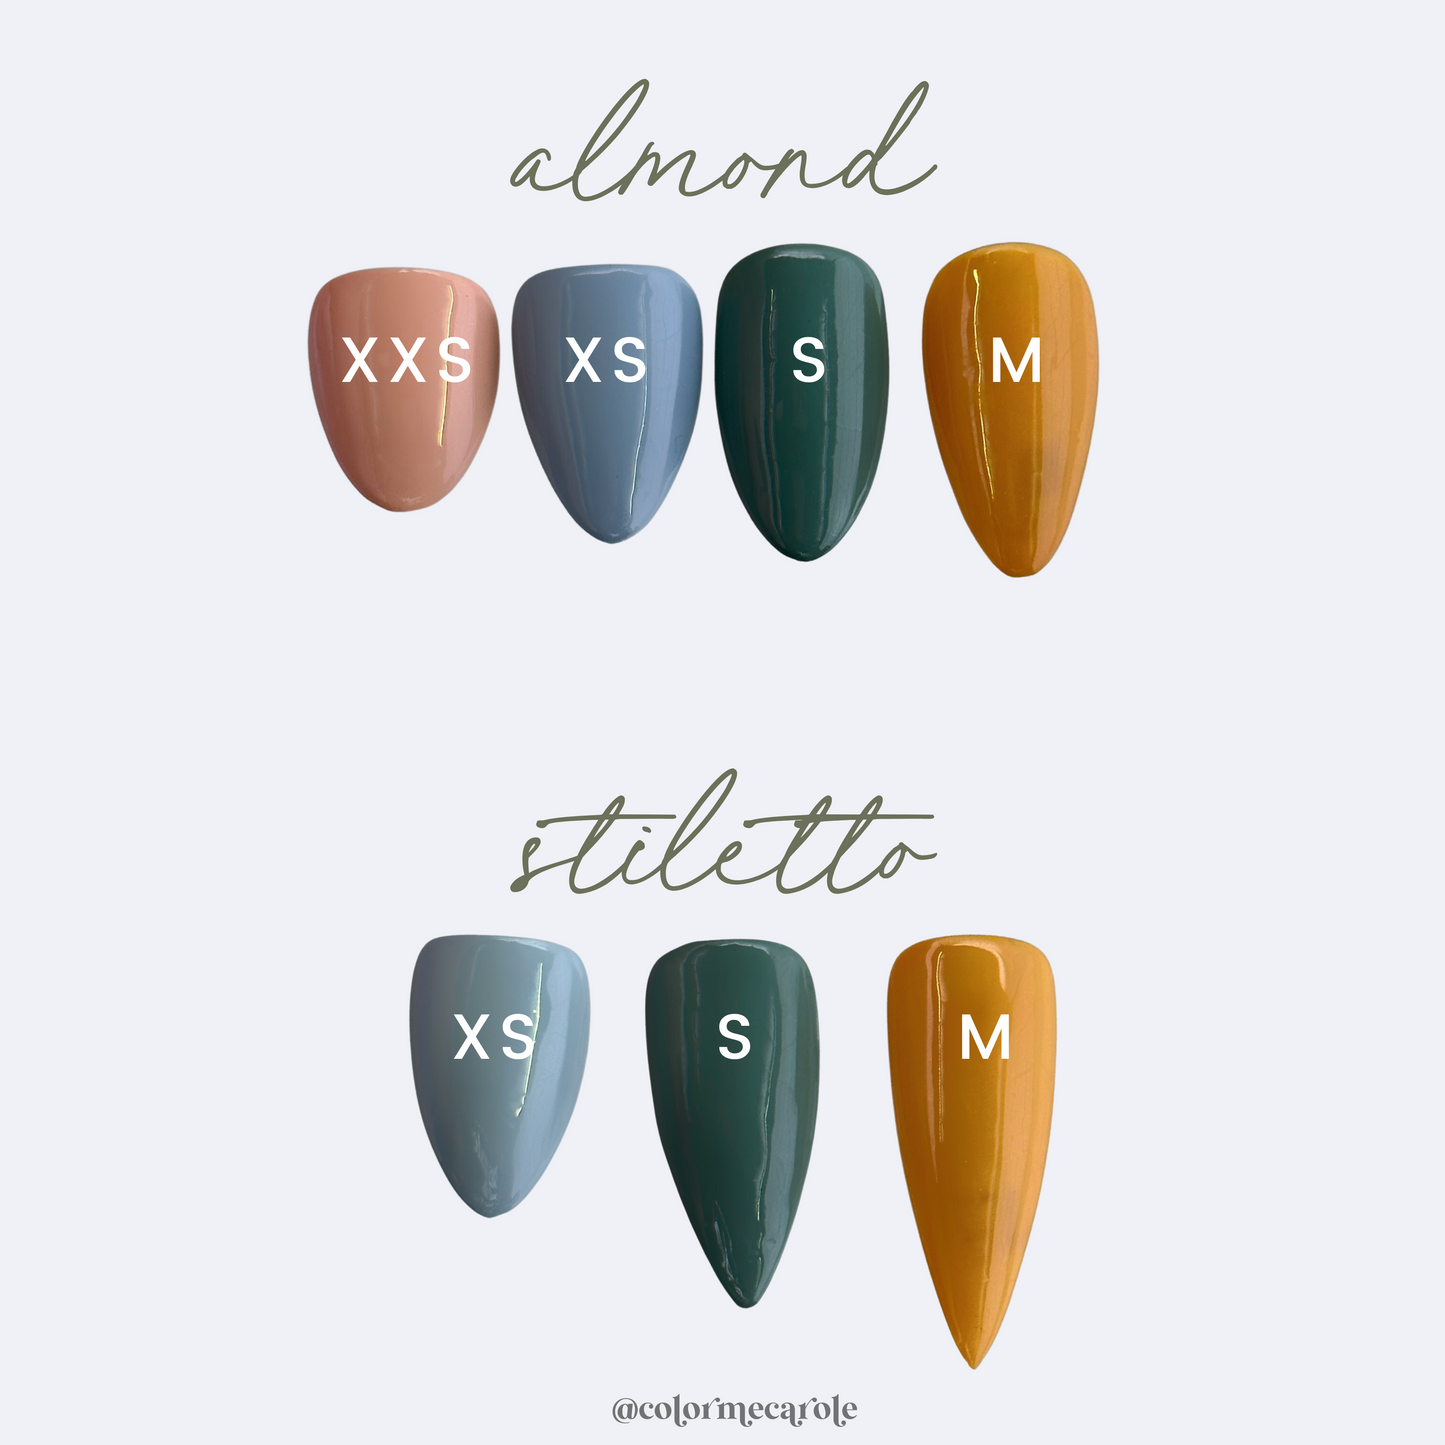 Mani Of The Month - Subscription